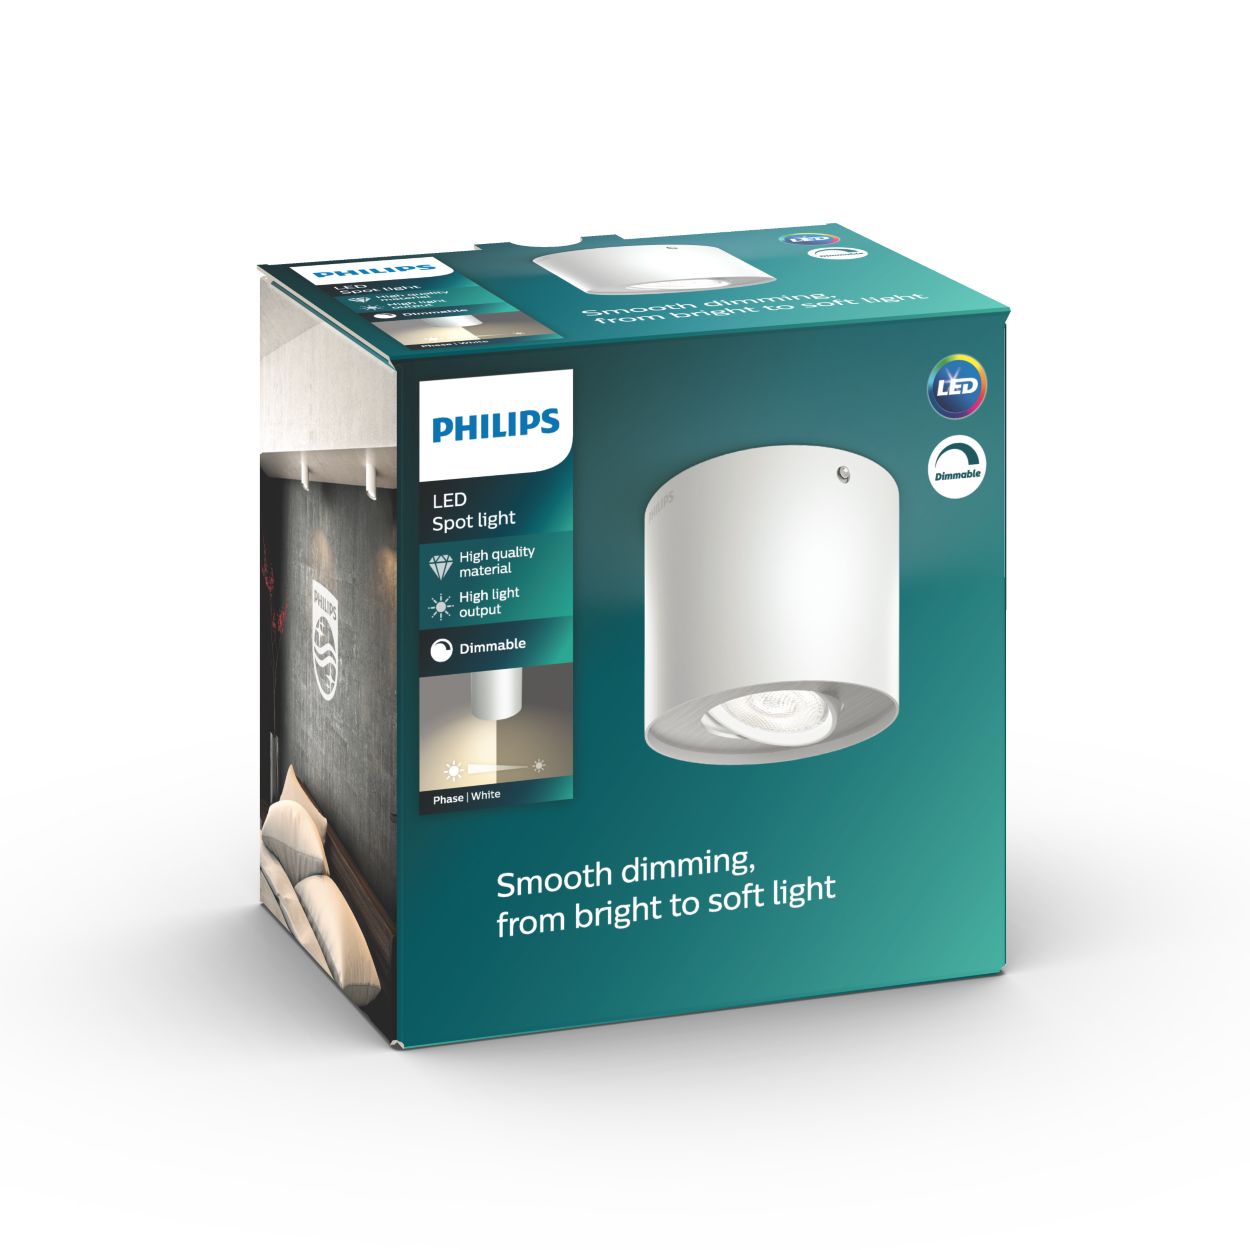 Dimmbare LED 533003116 Einzel-Spot Phase | Philips